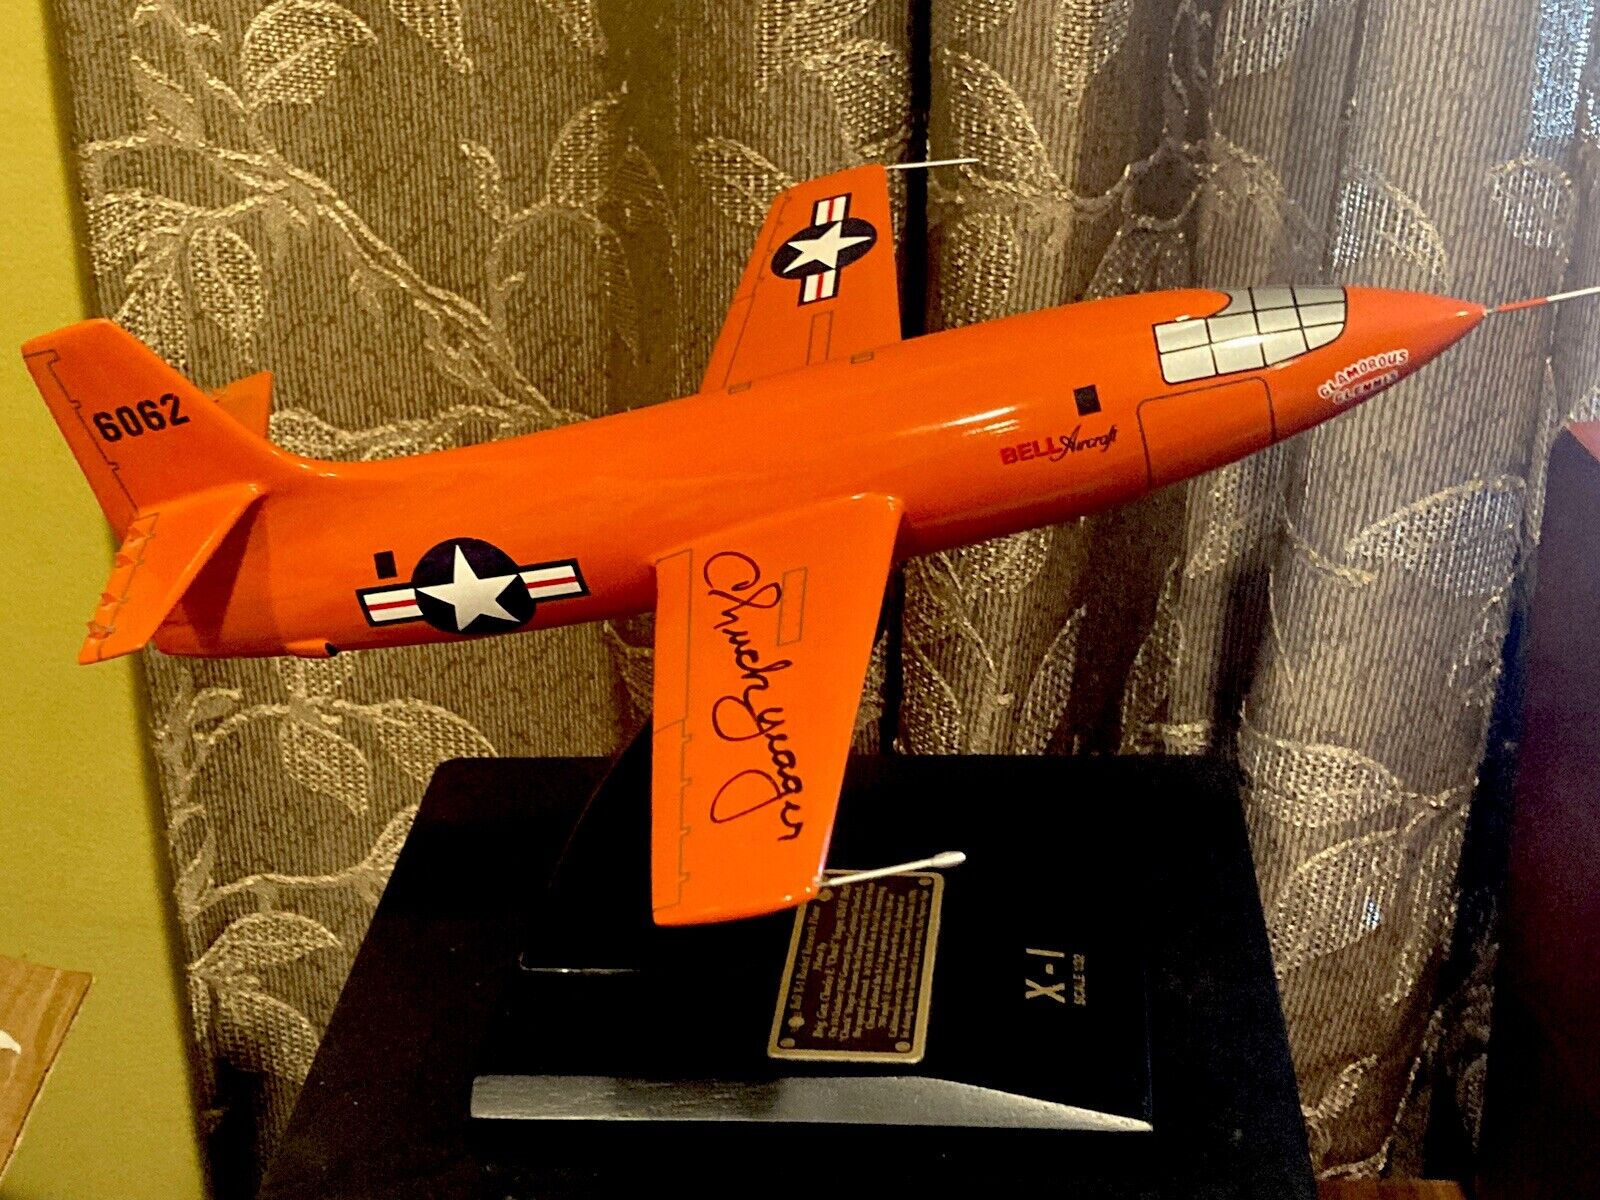 CHUCK YEAGER SPEED OF SOUND ACE PILOT SIGNED AUTO X-1 BELL JET ROCKET 1/32 Scale